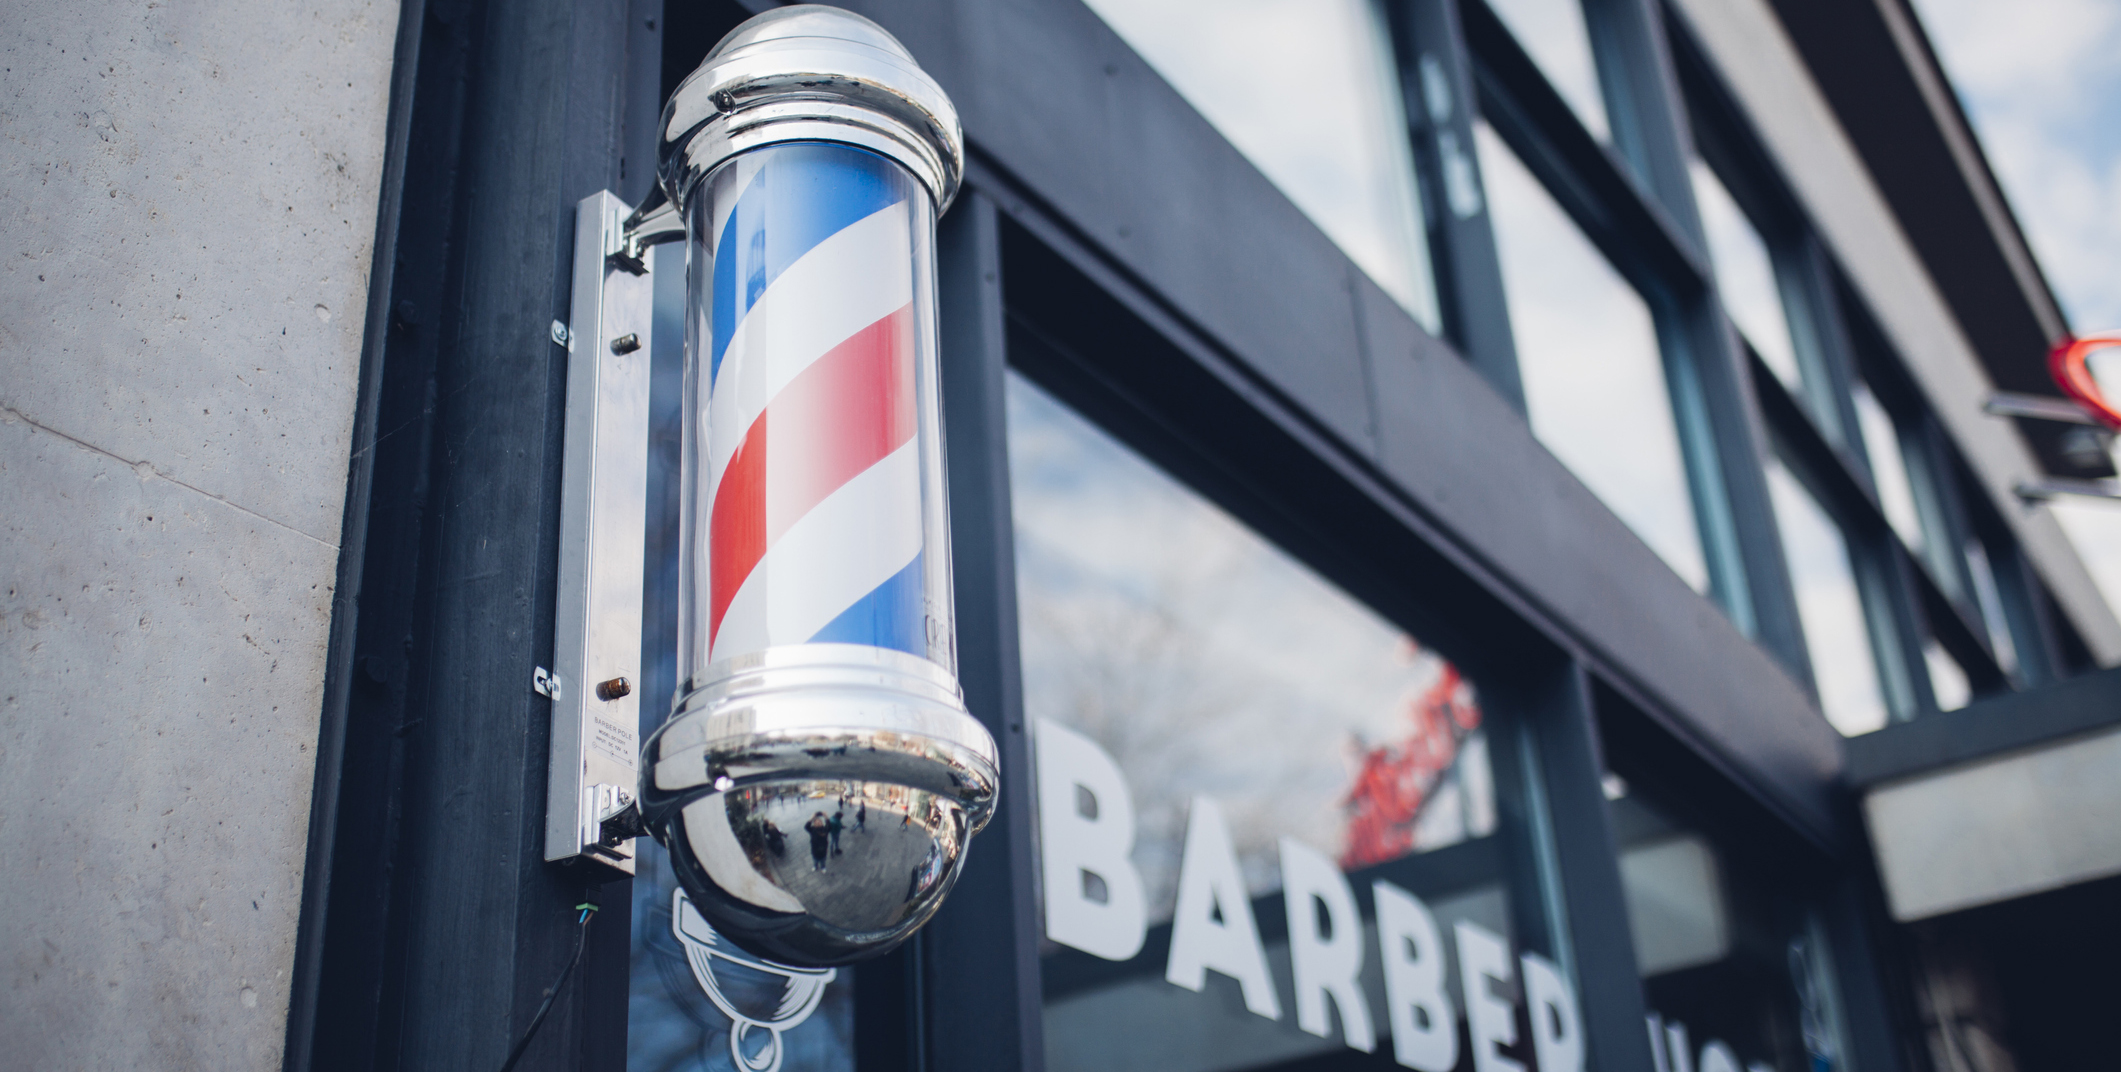 Photo of striped barbershop pole mounted on door of shop